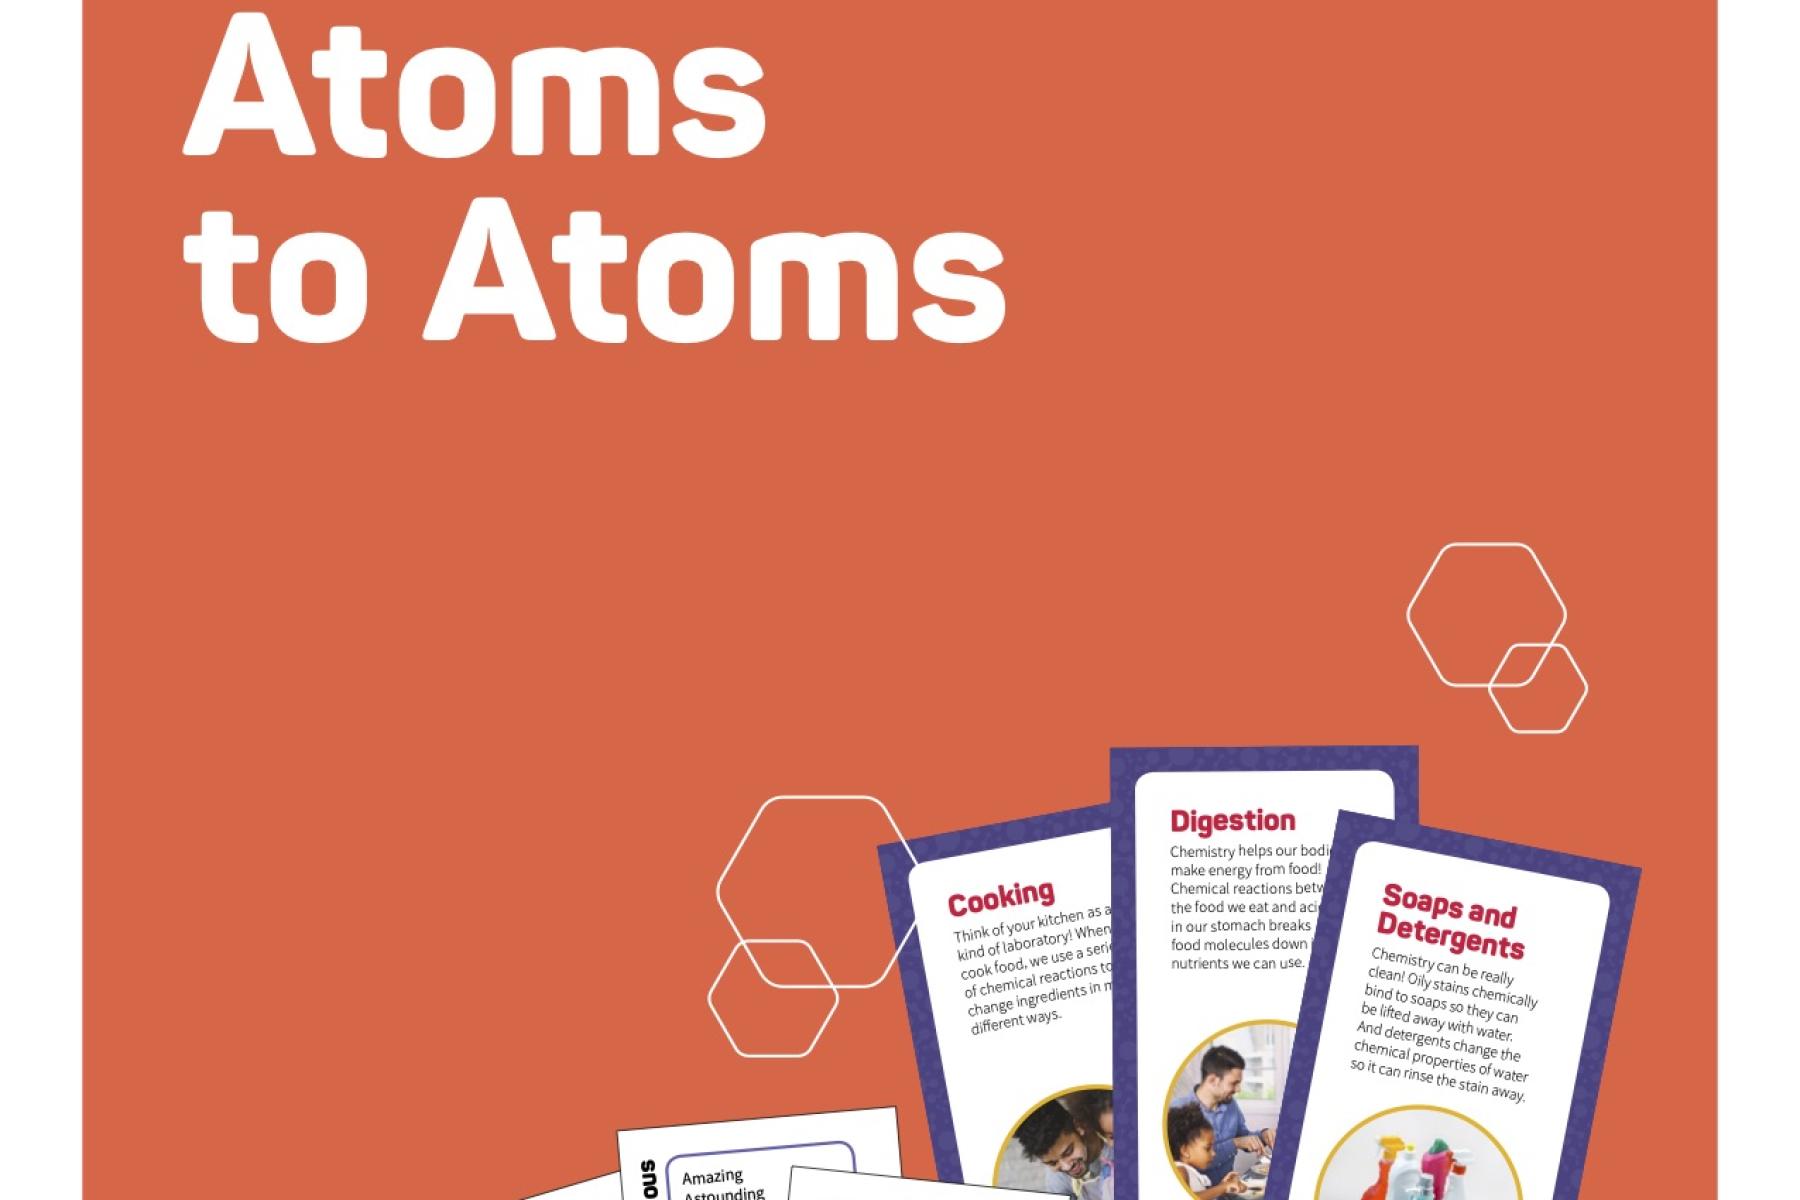 Image of the table sign for Atoms to Atoms card game